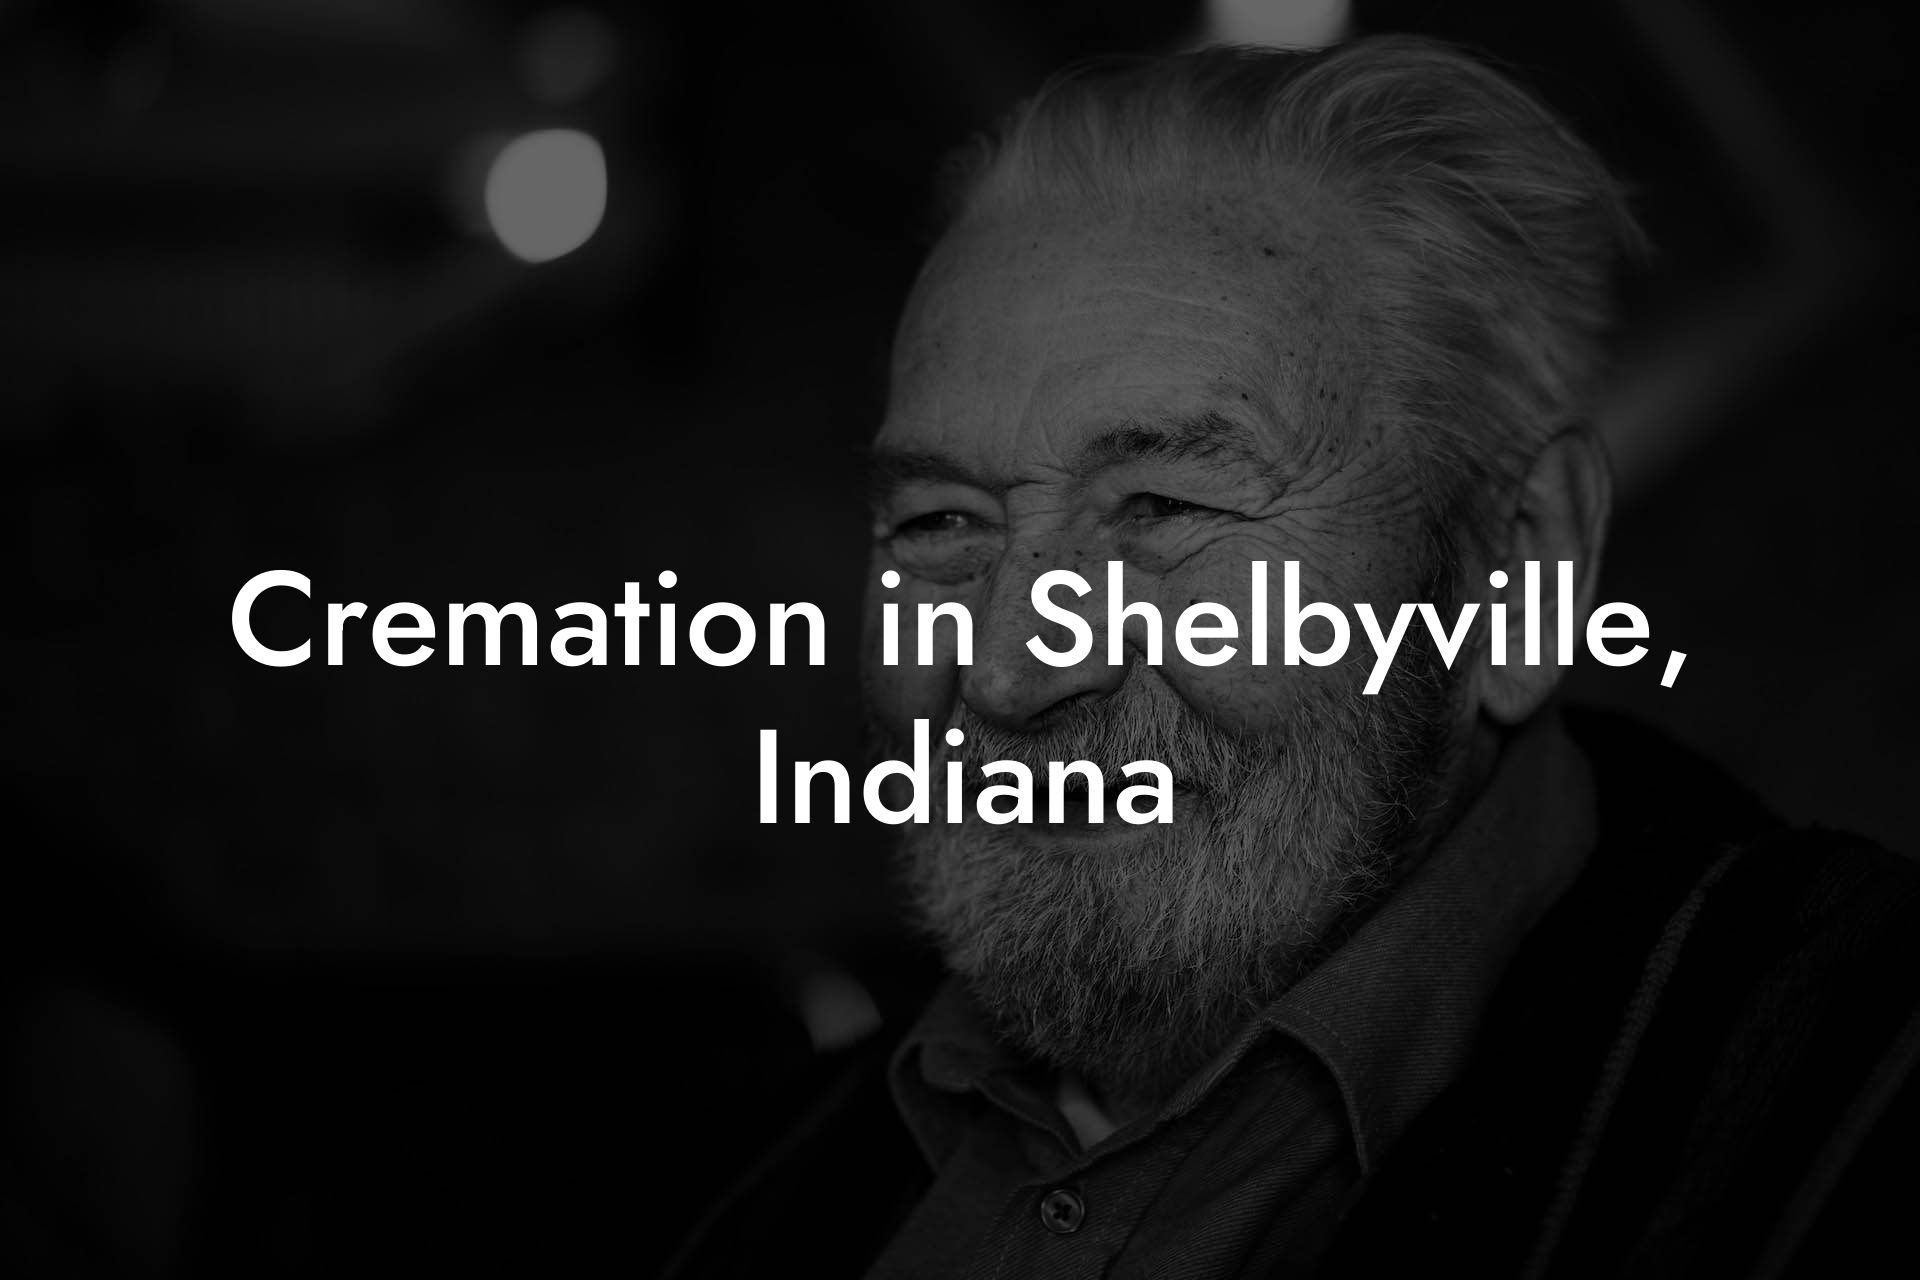 Cremation in Shelbyville, Indiana